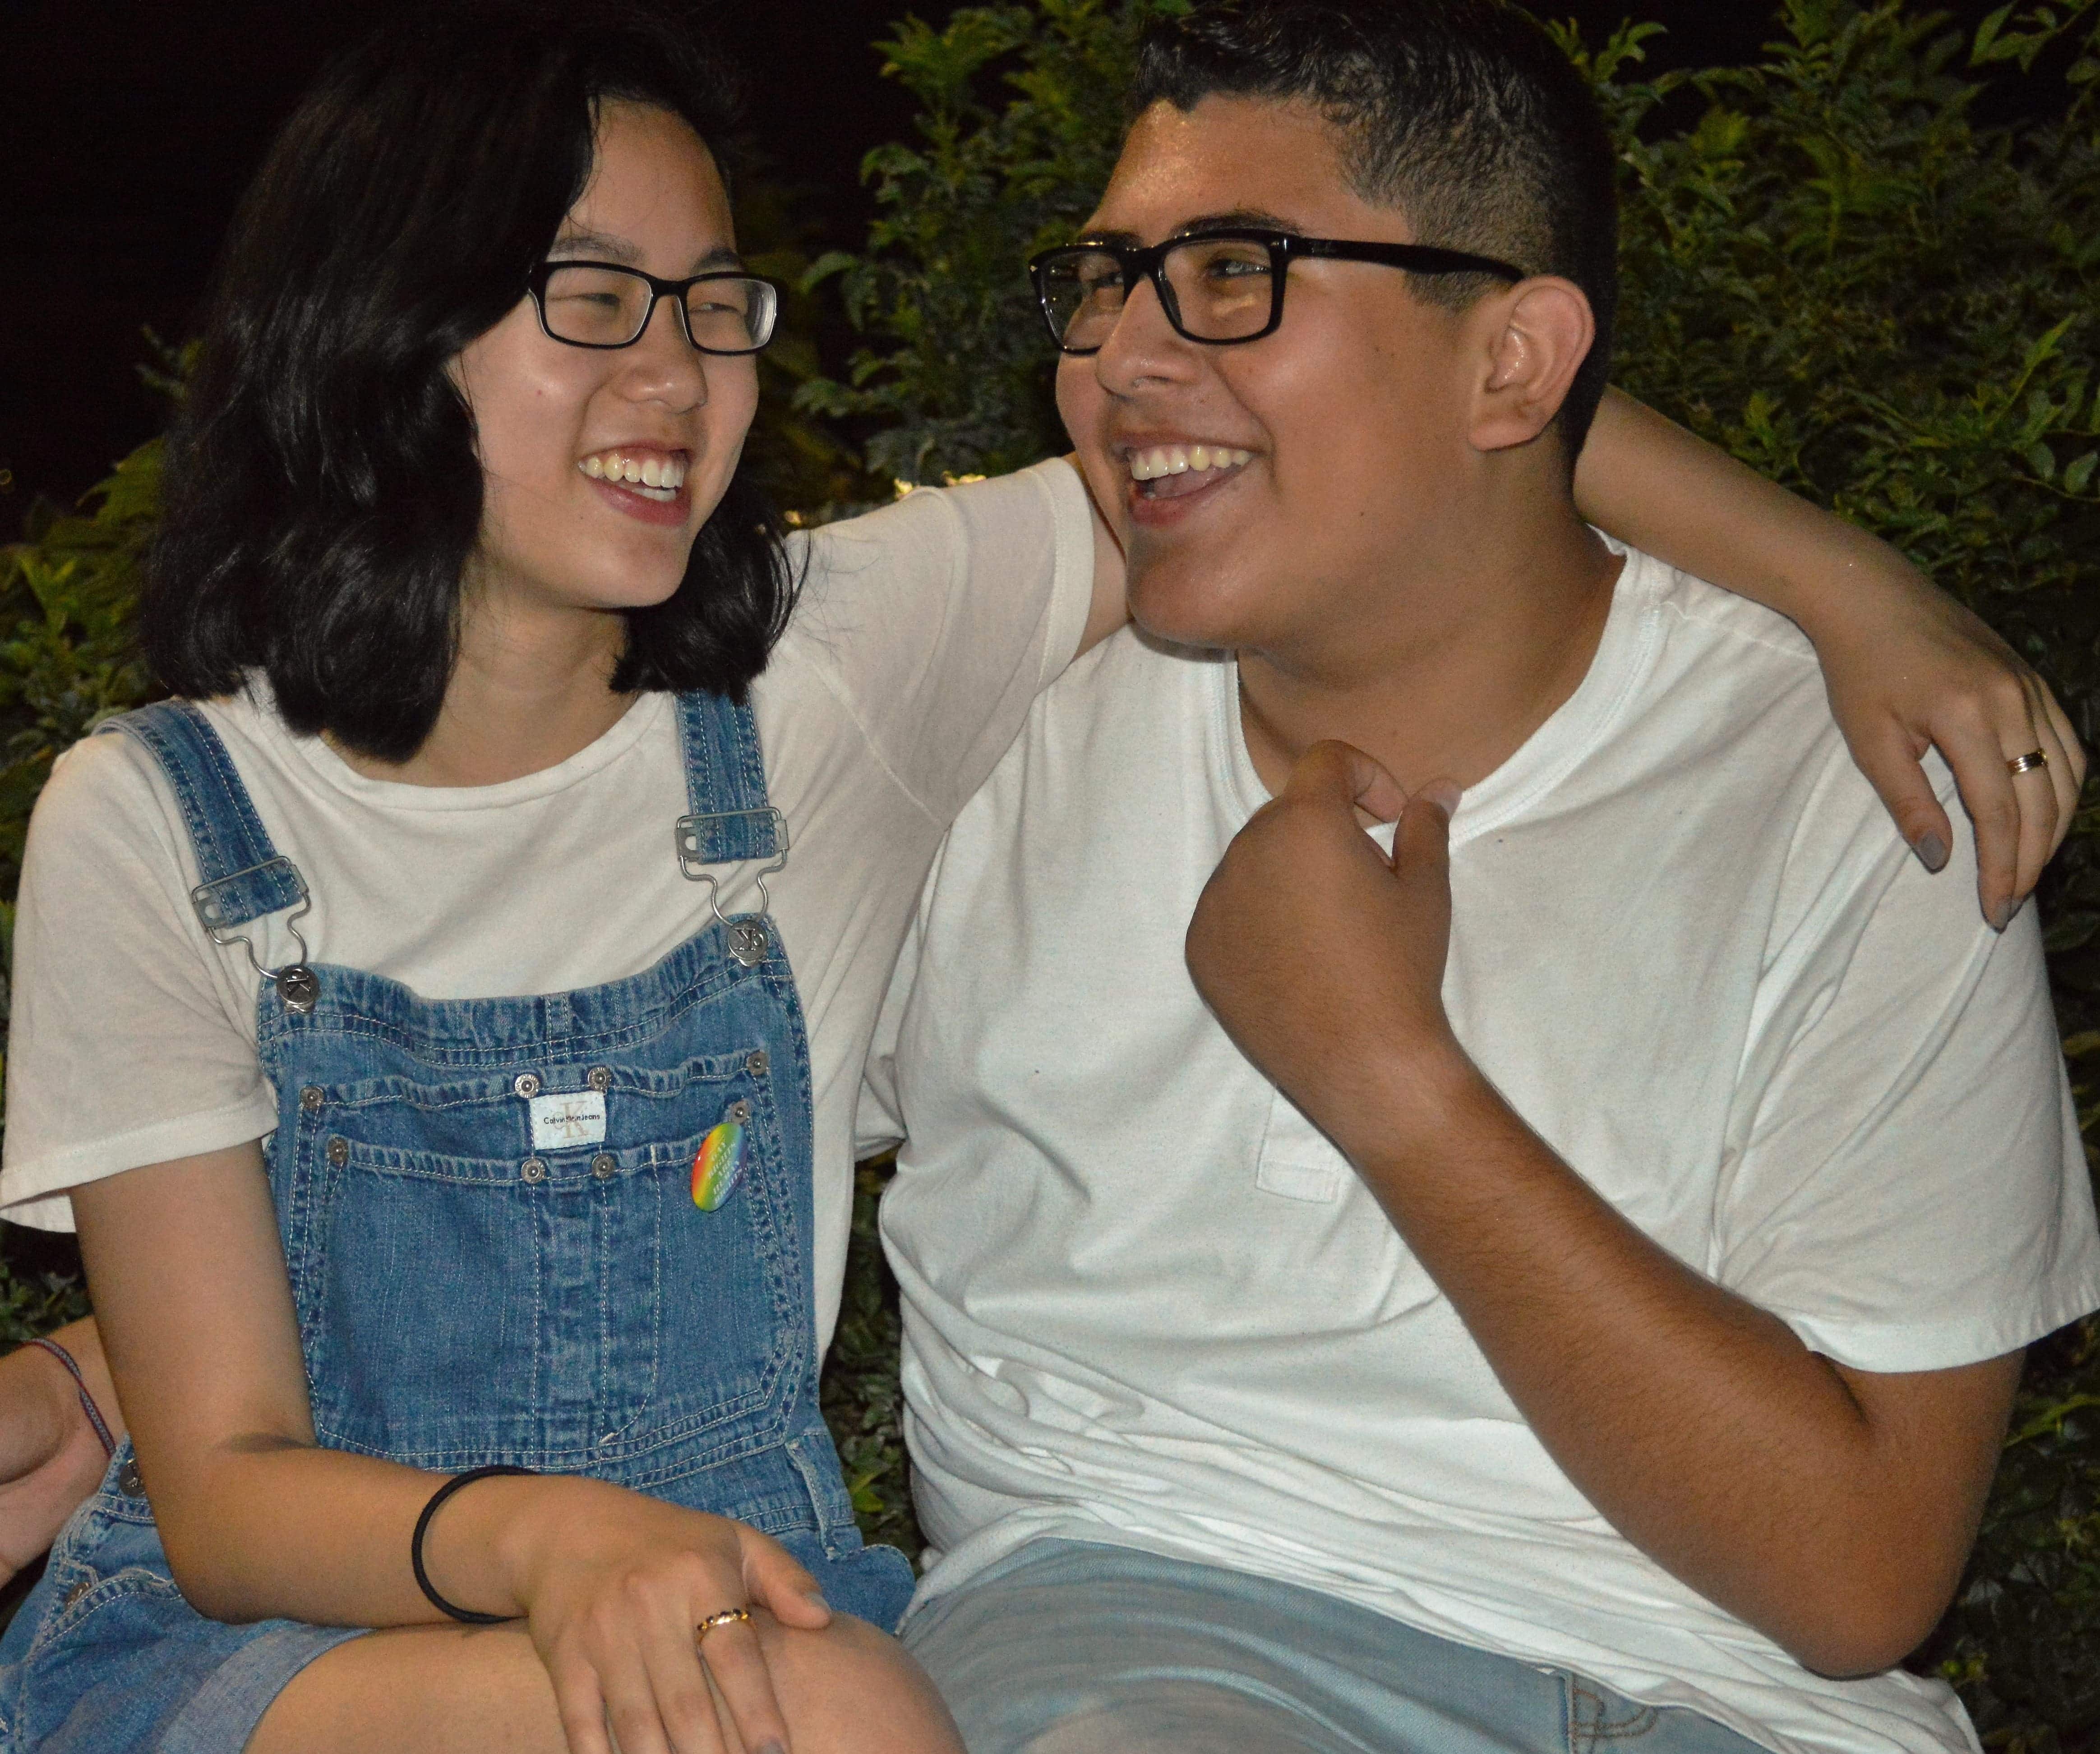 Sena Cheung (17, left) and Sebastian Flores (16, right) enjoying a Friday night in Central Park